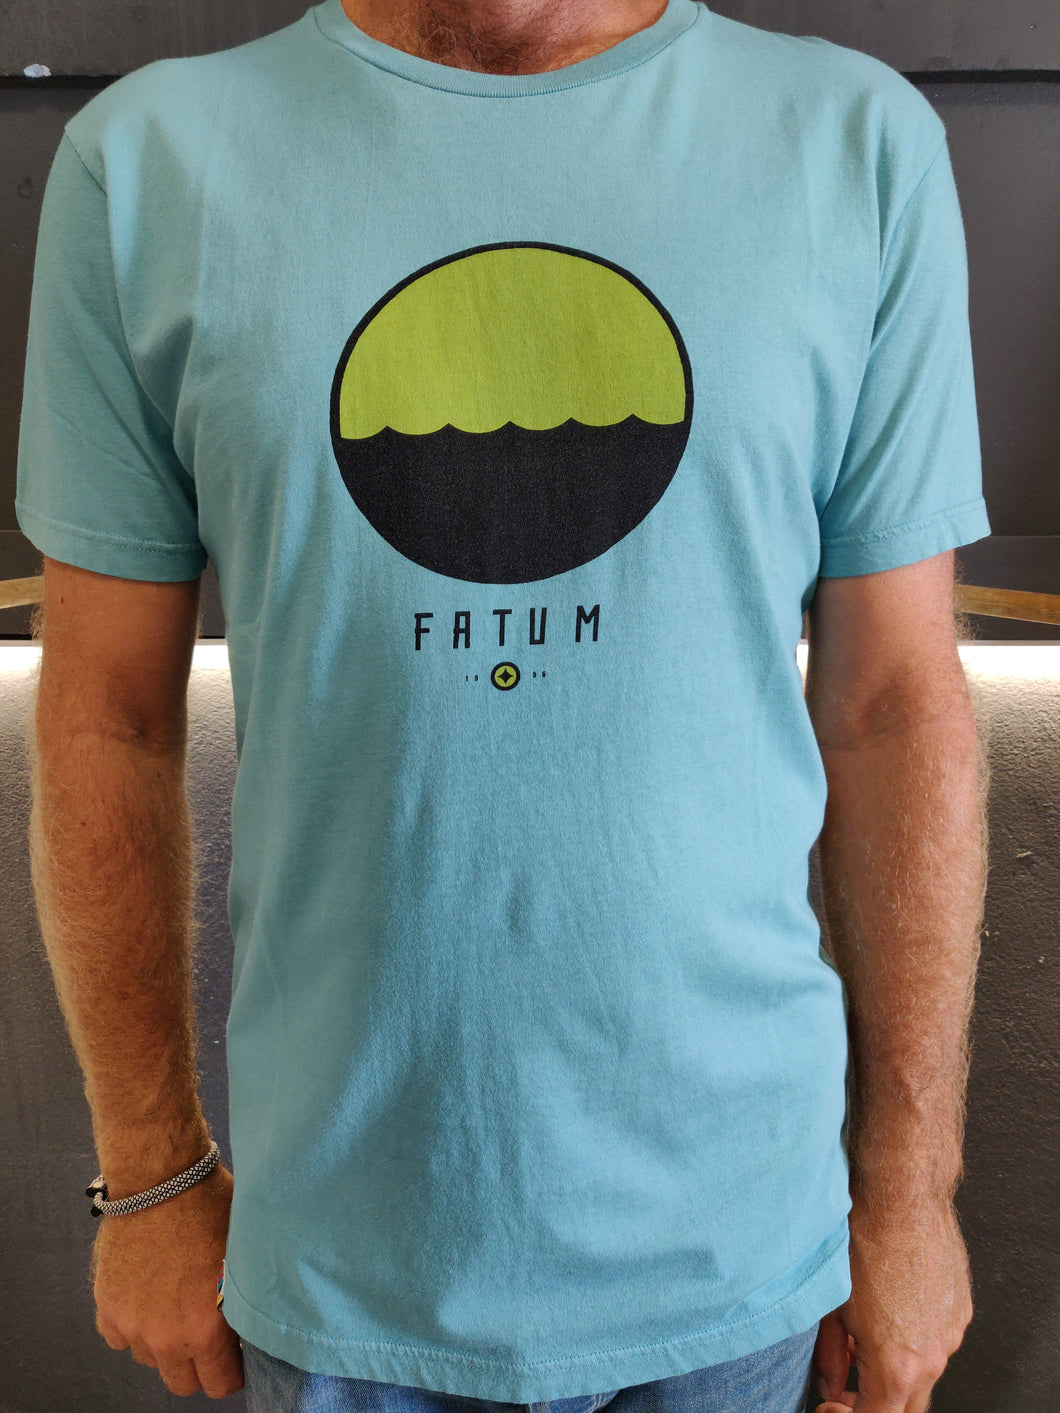 2020 Fatum Telescope Tee in Sea Blue.  Model is wearing an L and is 186cm tall at 85kg. (6'1